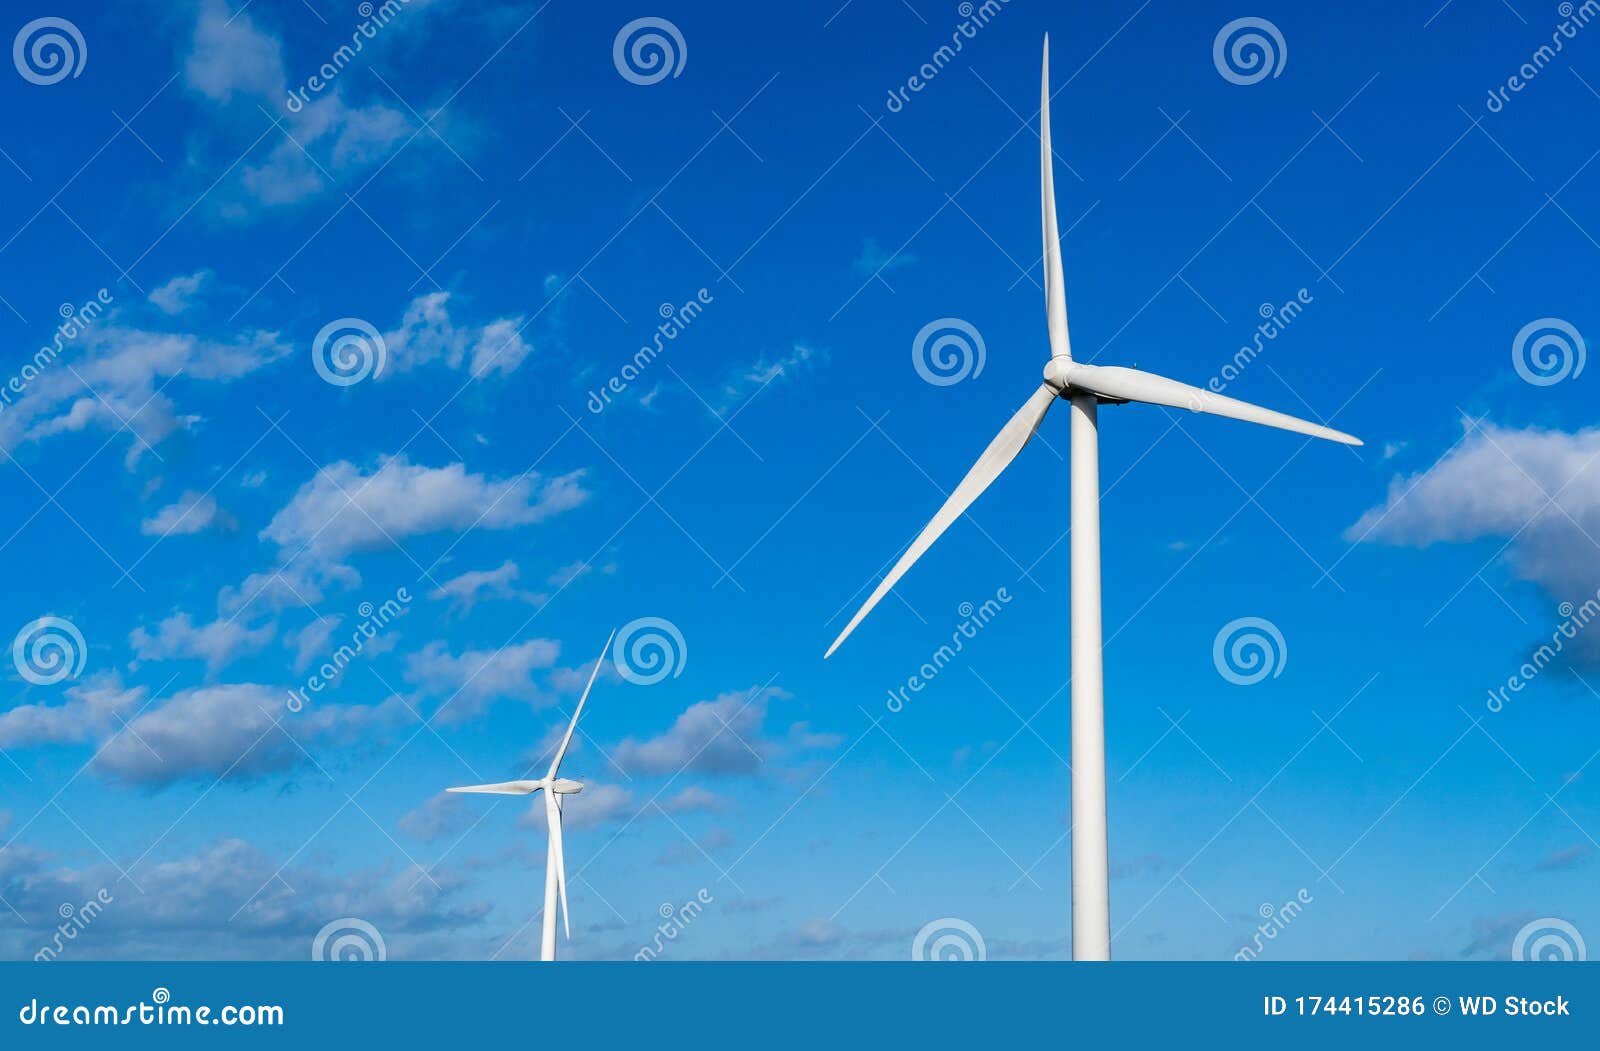 two wind turbines set against a blue sky